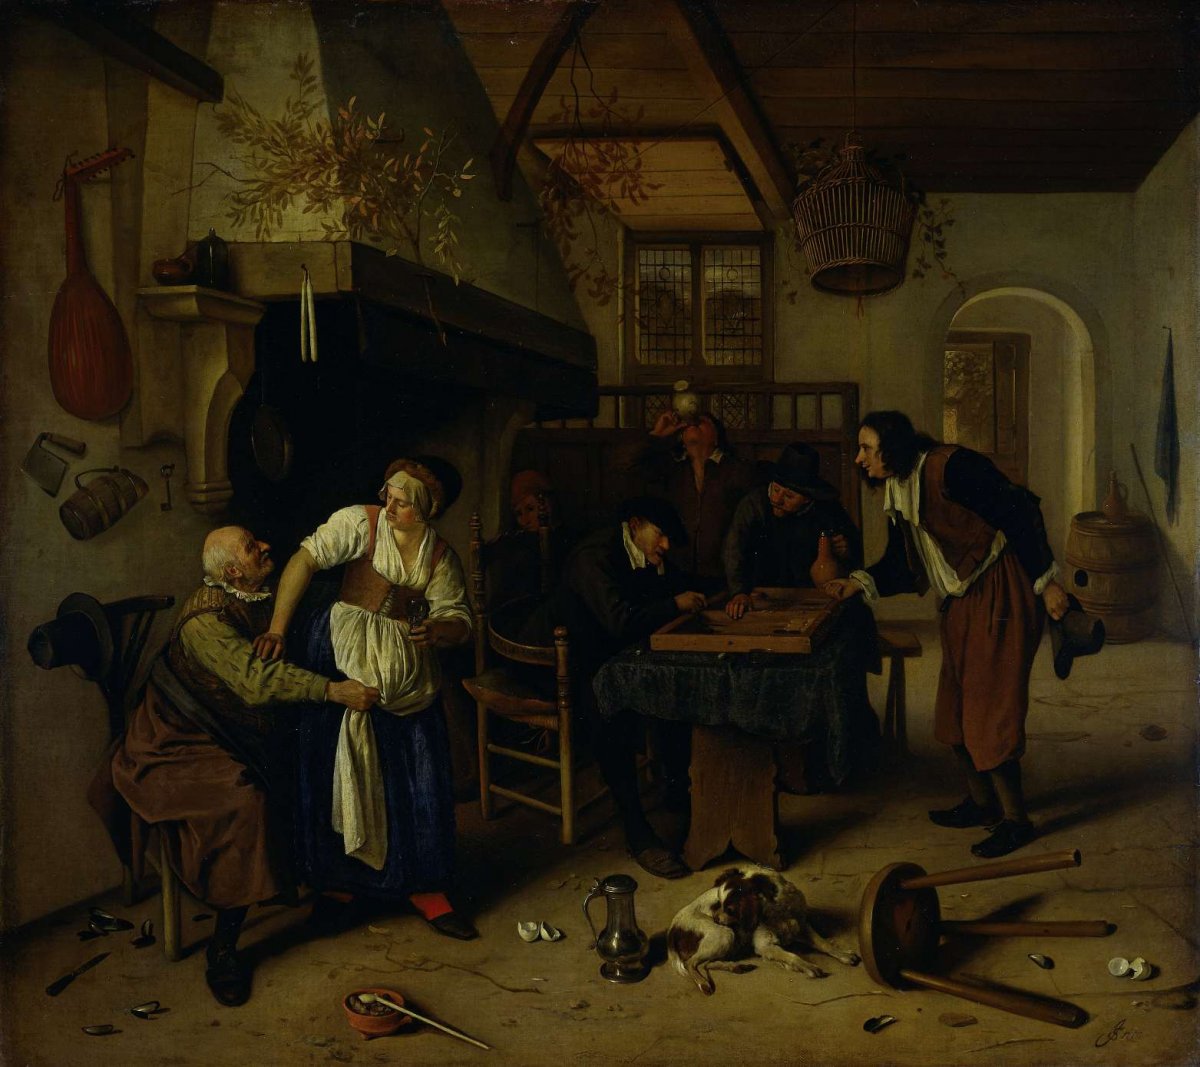 Interior of an inn with an old man amusing himself with the landlady and two men playing backgammon, known as 'Two kinds of games', Jan Havicksz. Steen, 1660 - 1679